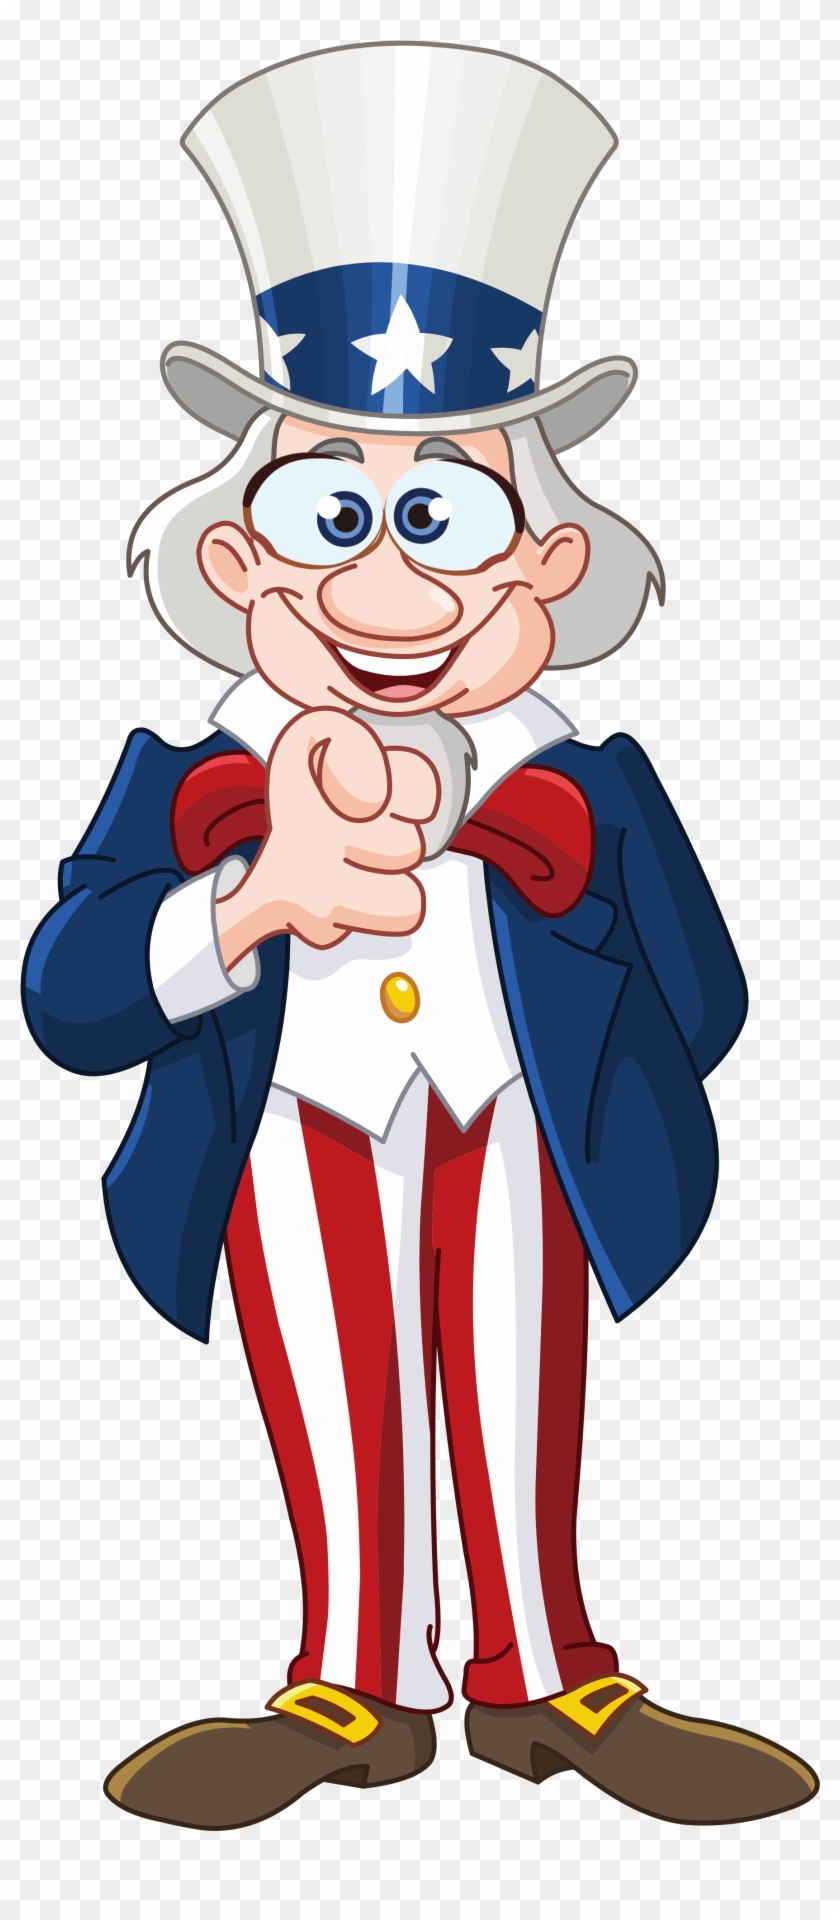 Uncle Sam Royalty-free Stock Photography Clip Art - Uncle Sam Royalty-free Stock Photography Clip Art #448937